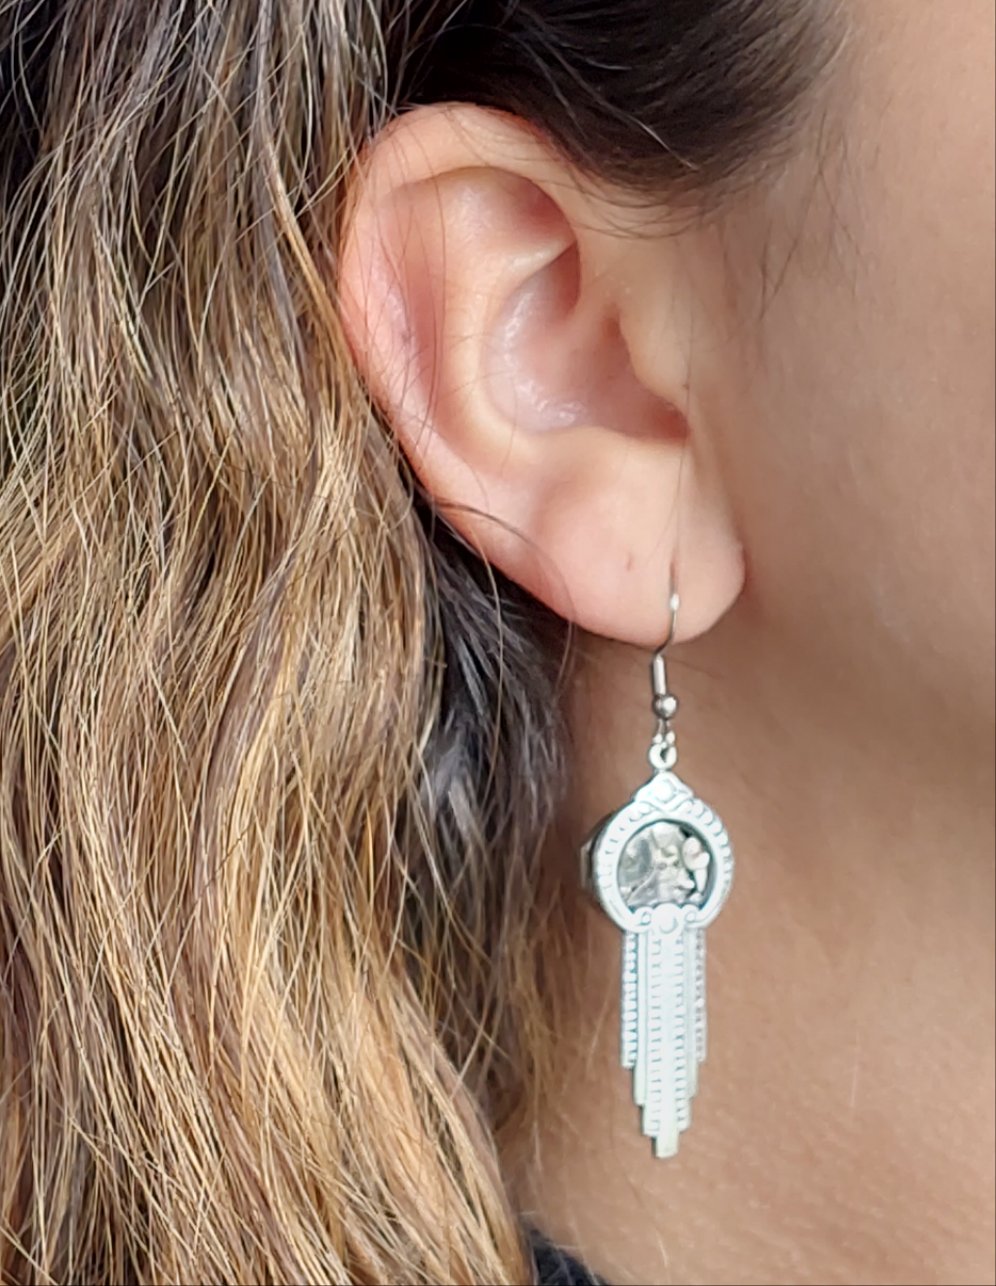 BESTSELLER!! Art Deco Waterfall Earrings with Timepieces